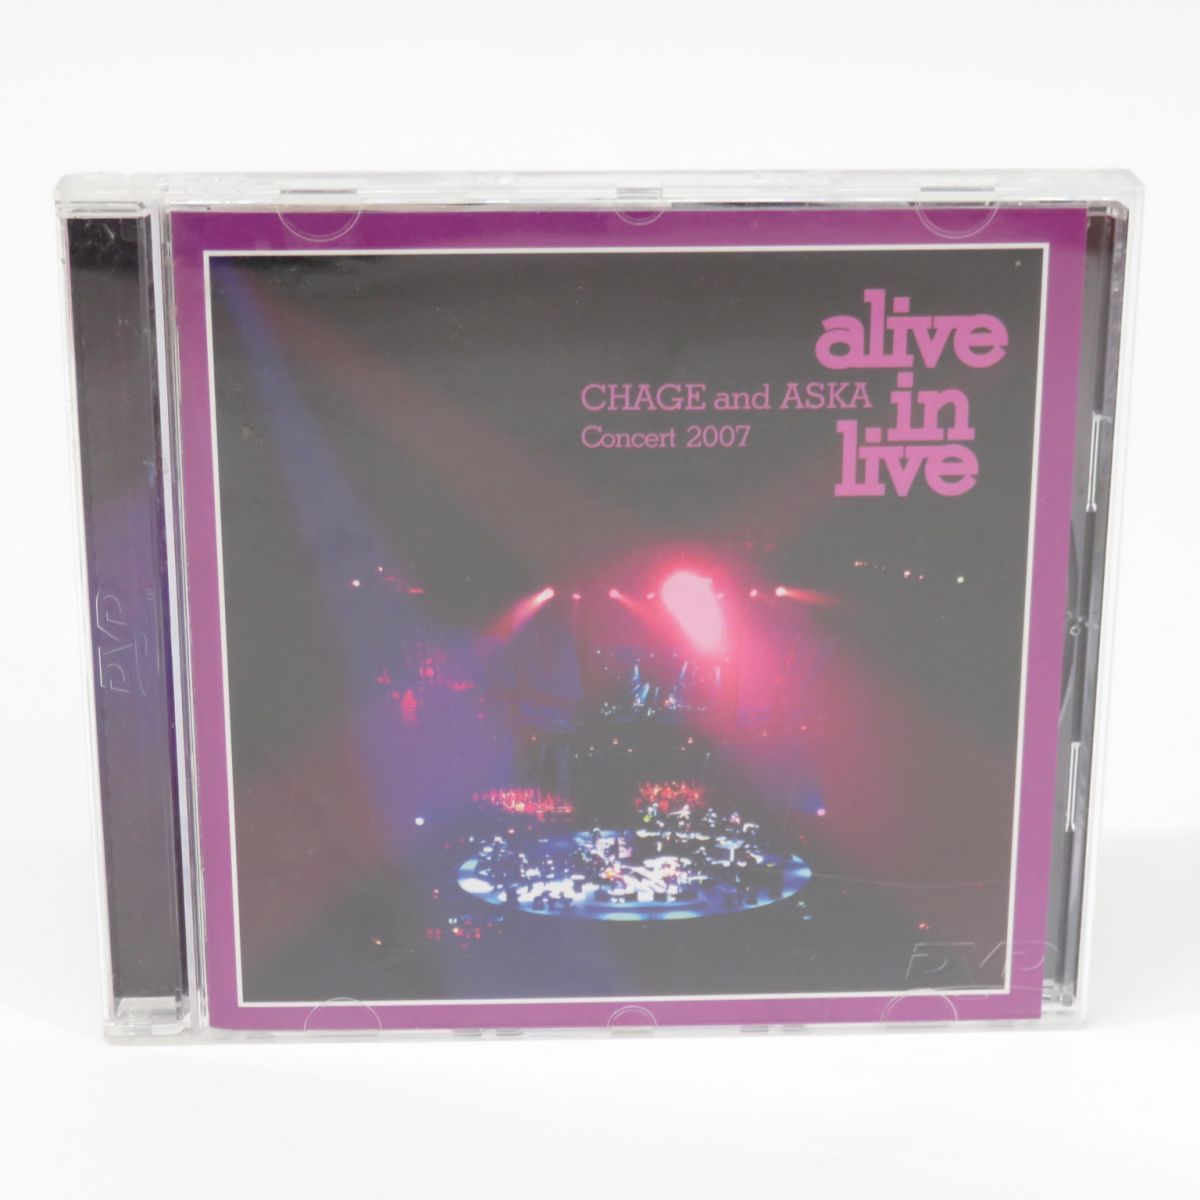 DVD CHAGE and ASKA Concert 2007 alive in live　※中古